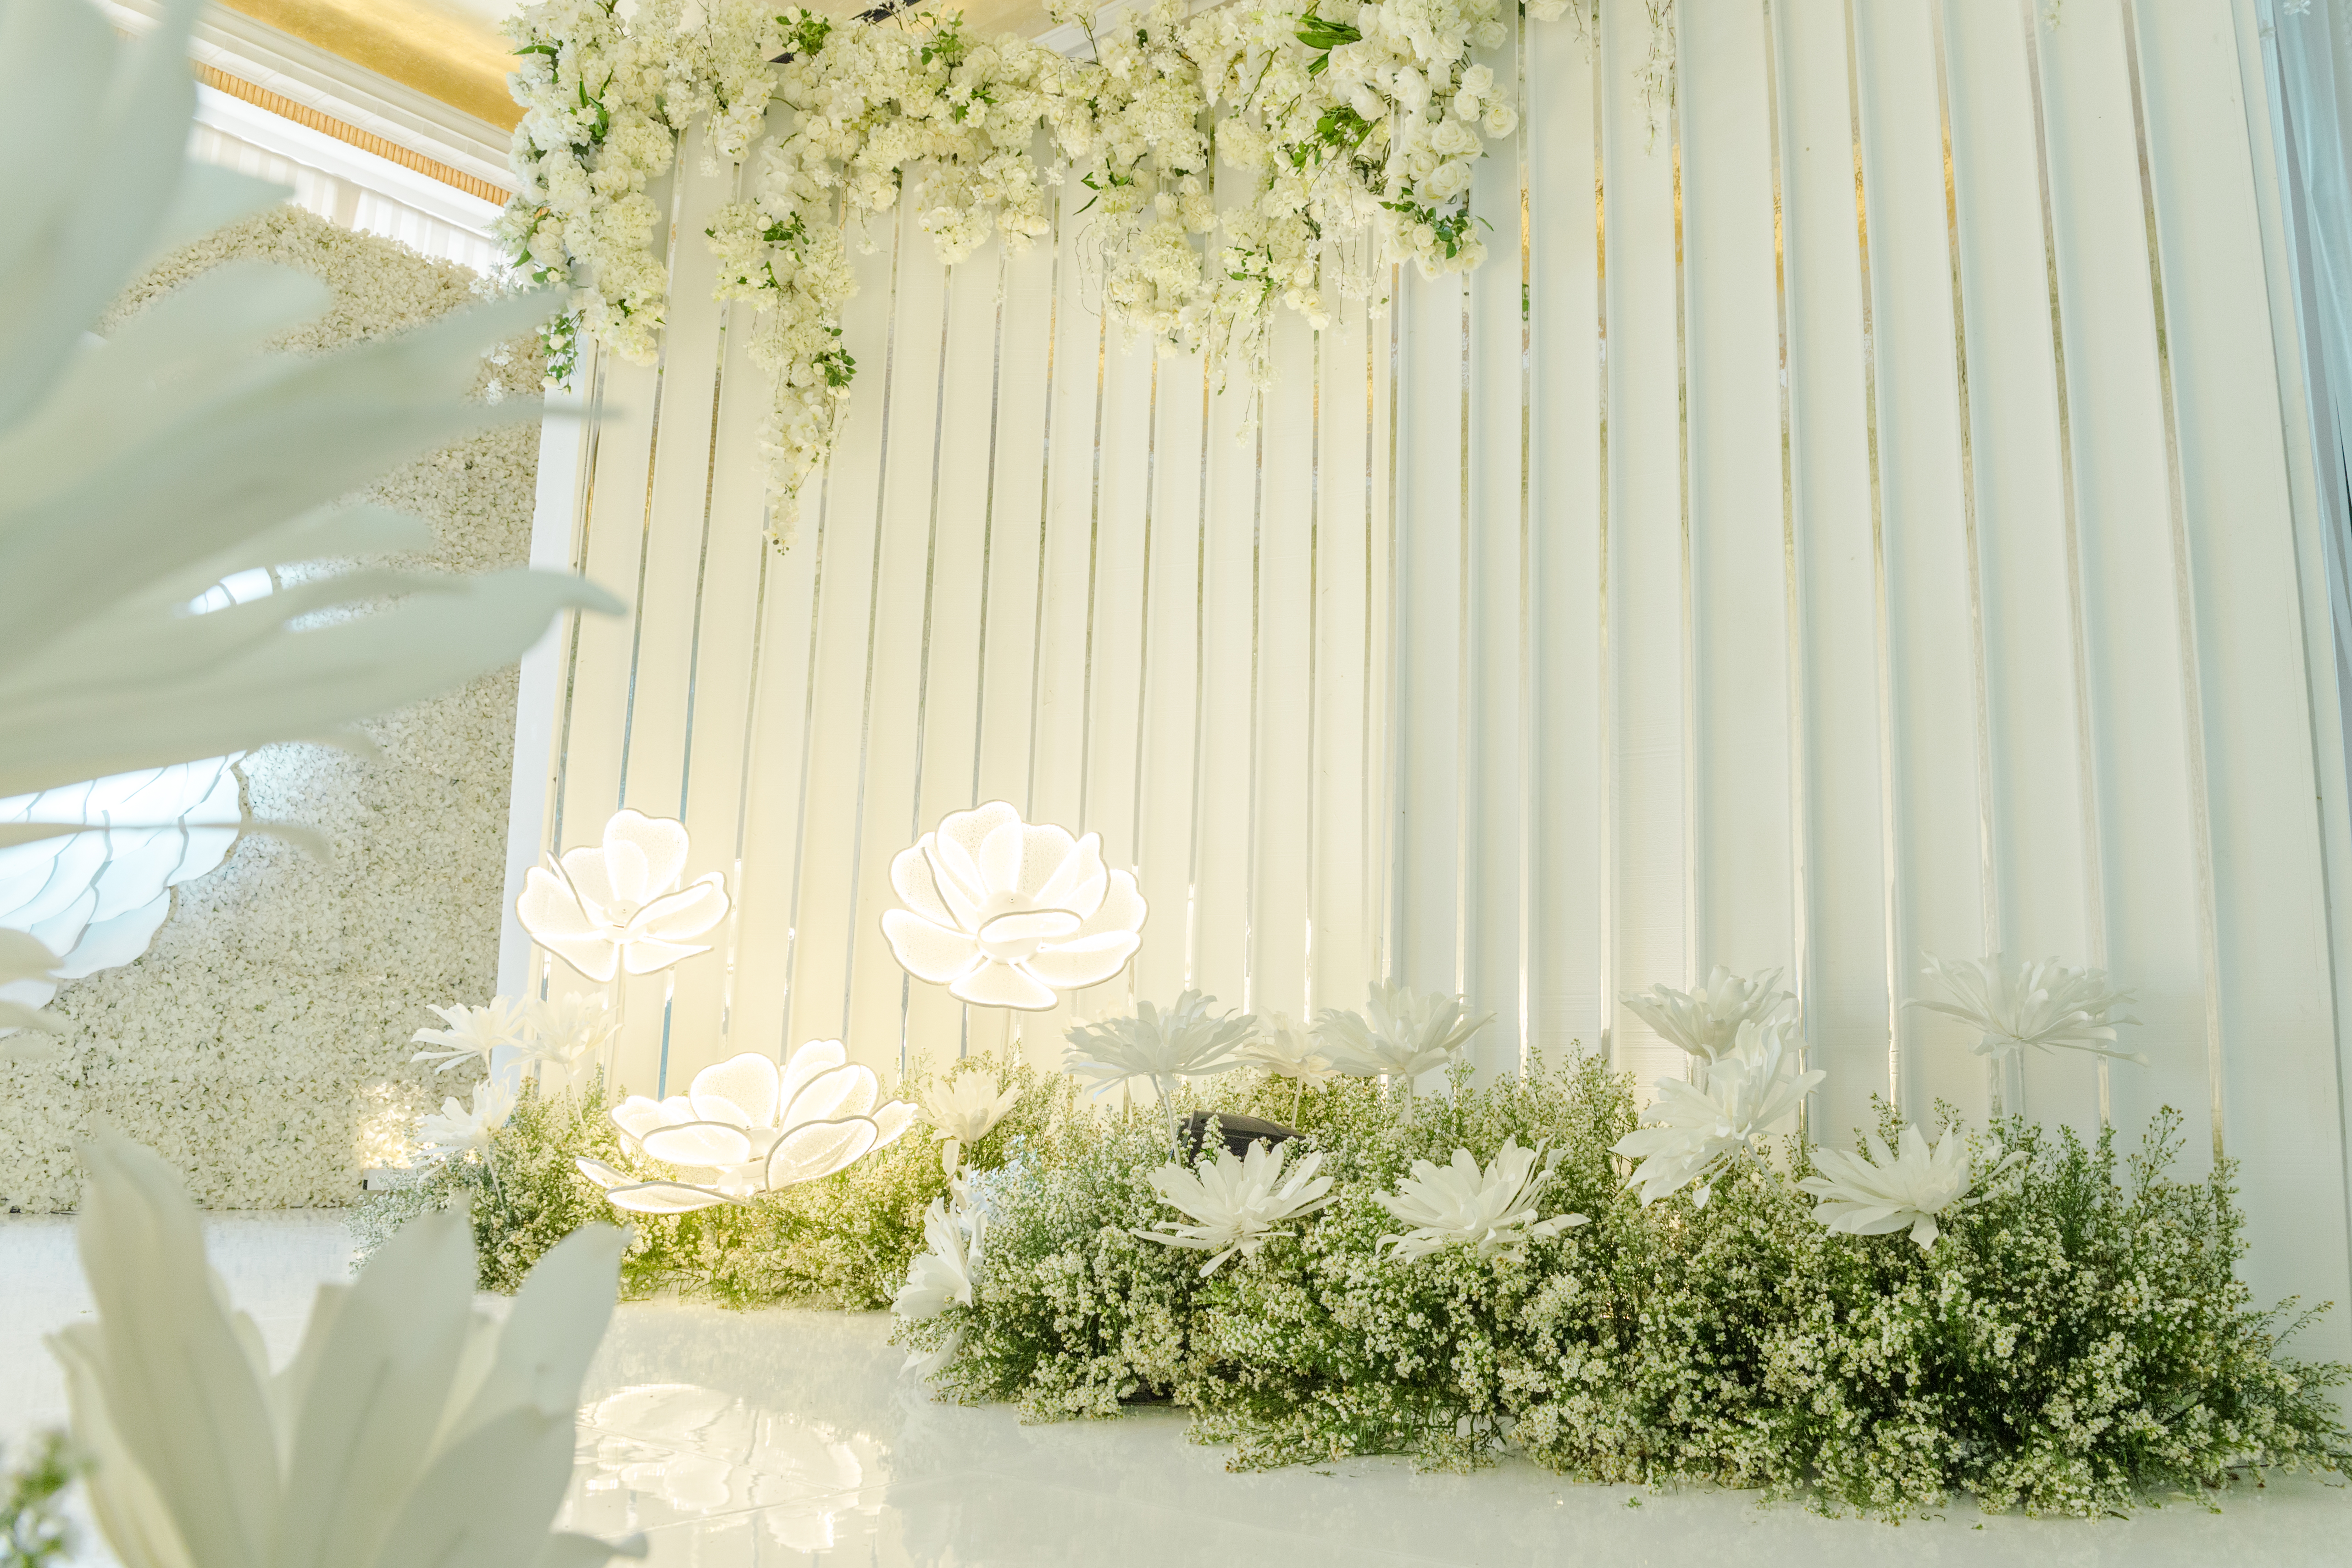 Wedding of Syahrini and Reino Barack | Venue at Four Seasons Jakarta | Decoration by Lotus Design | Organised by ByFaith Credo Planner | Lighting by Lightworks